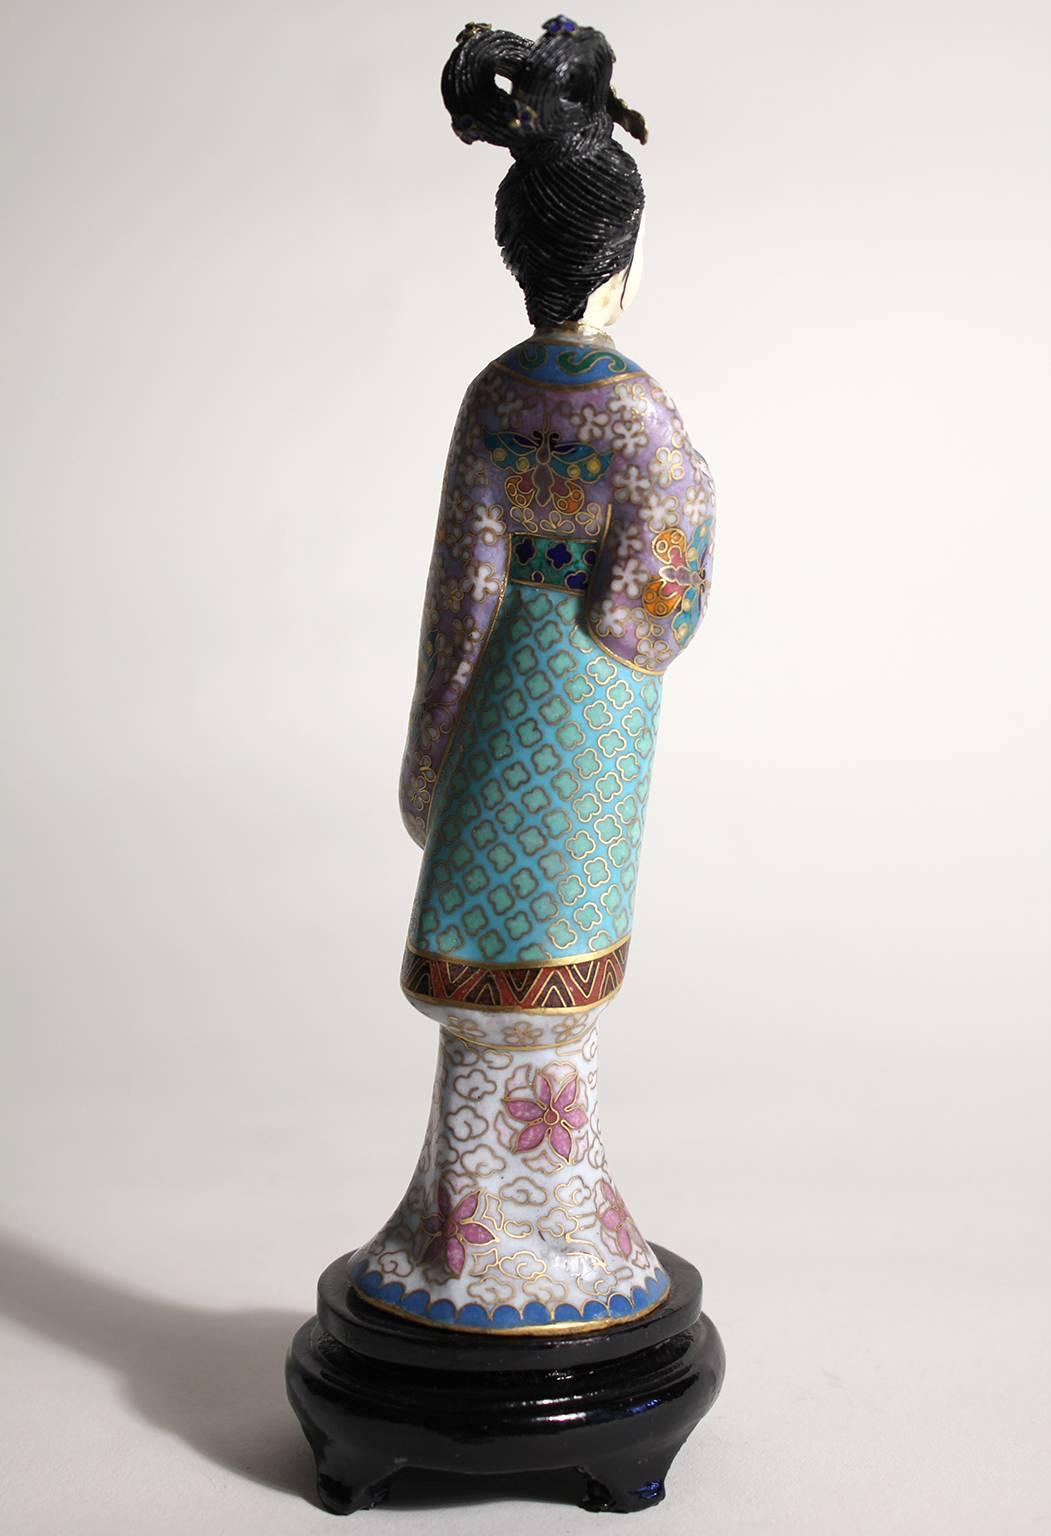 Antique Chinese Cloisonne Enameled Carved Guanyin Quan Yin Sculpture ...